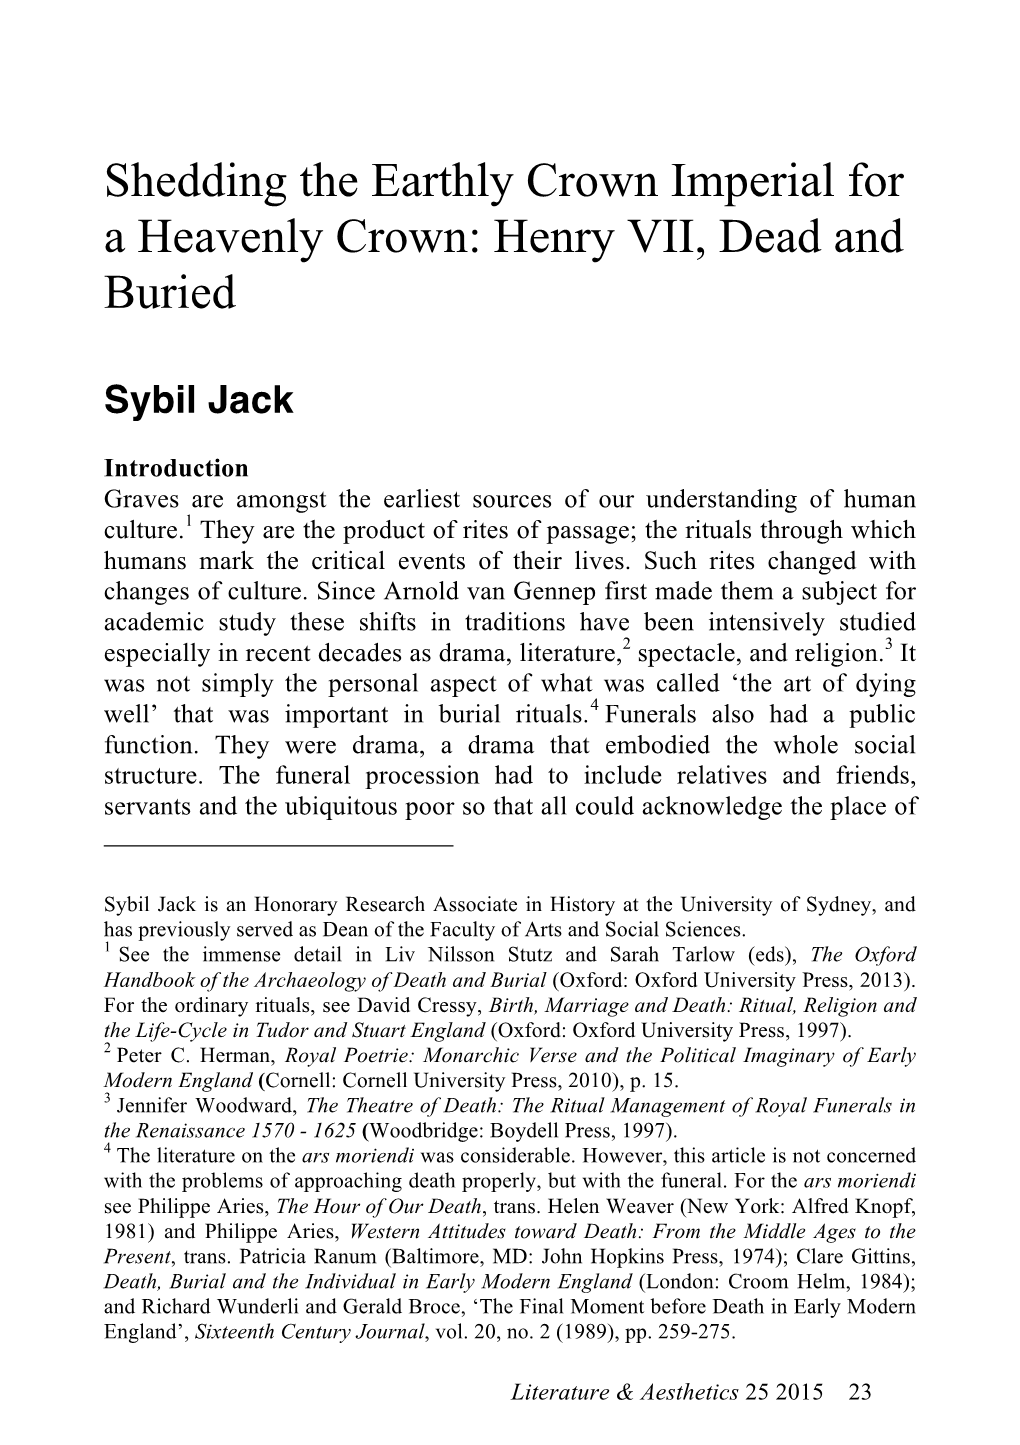 Henry VII, Dead and Buried